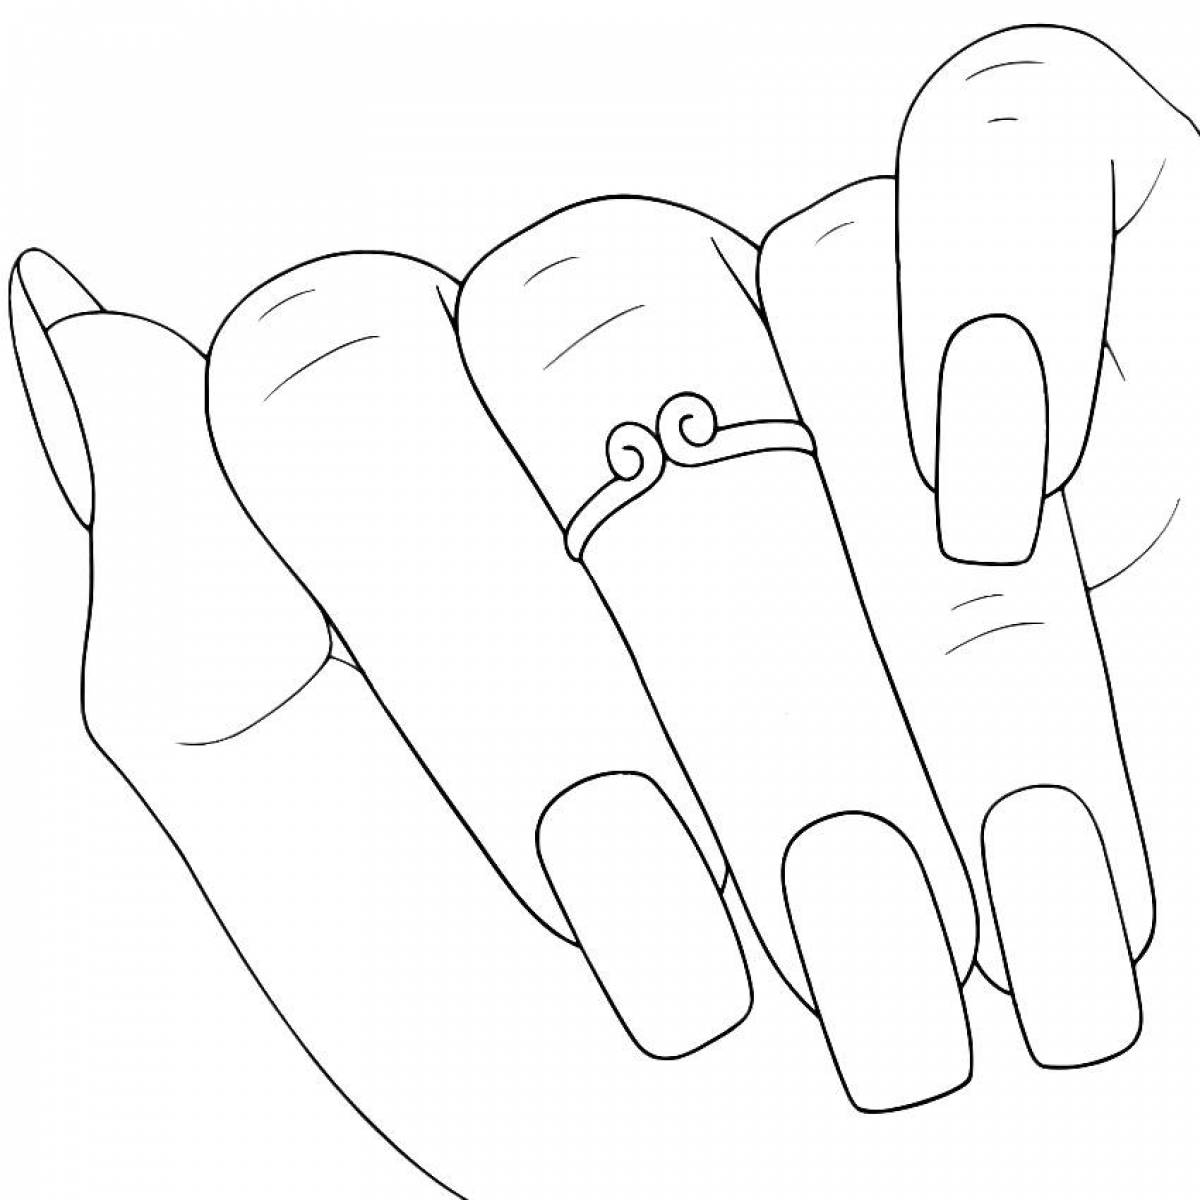 Humorous manicure coloring book